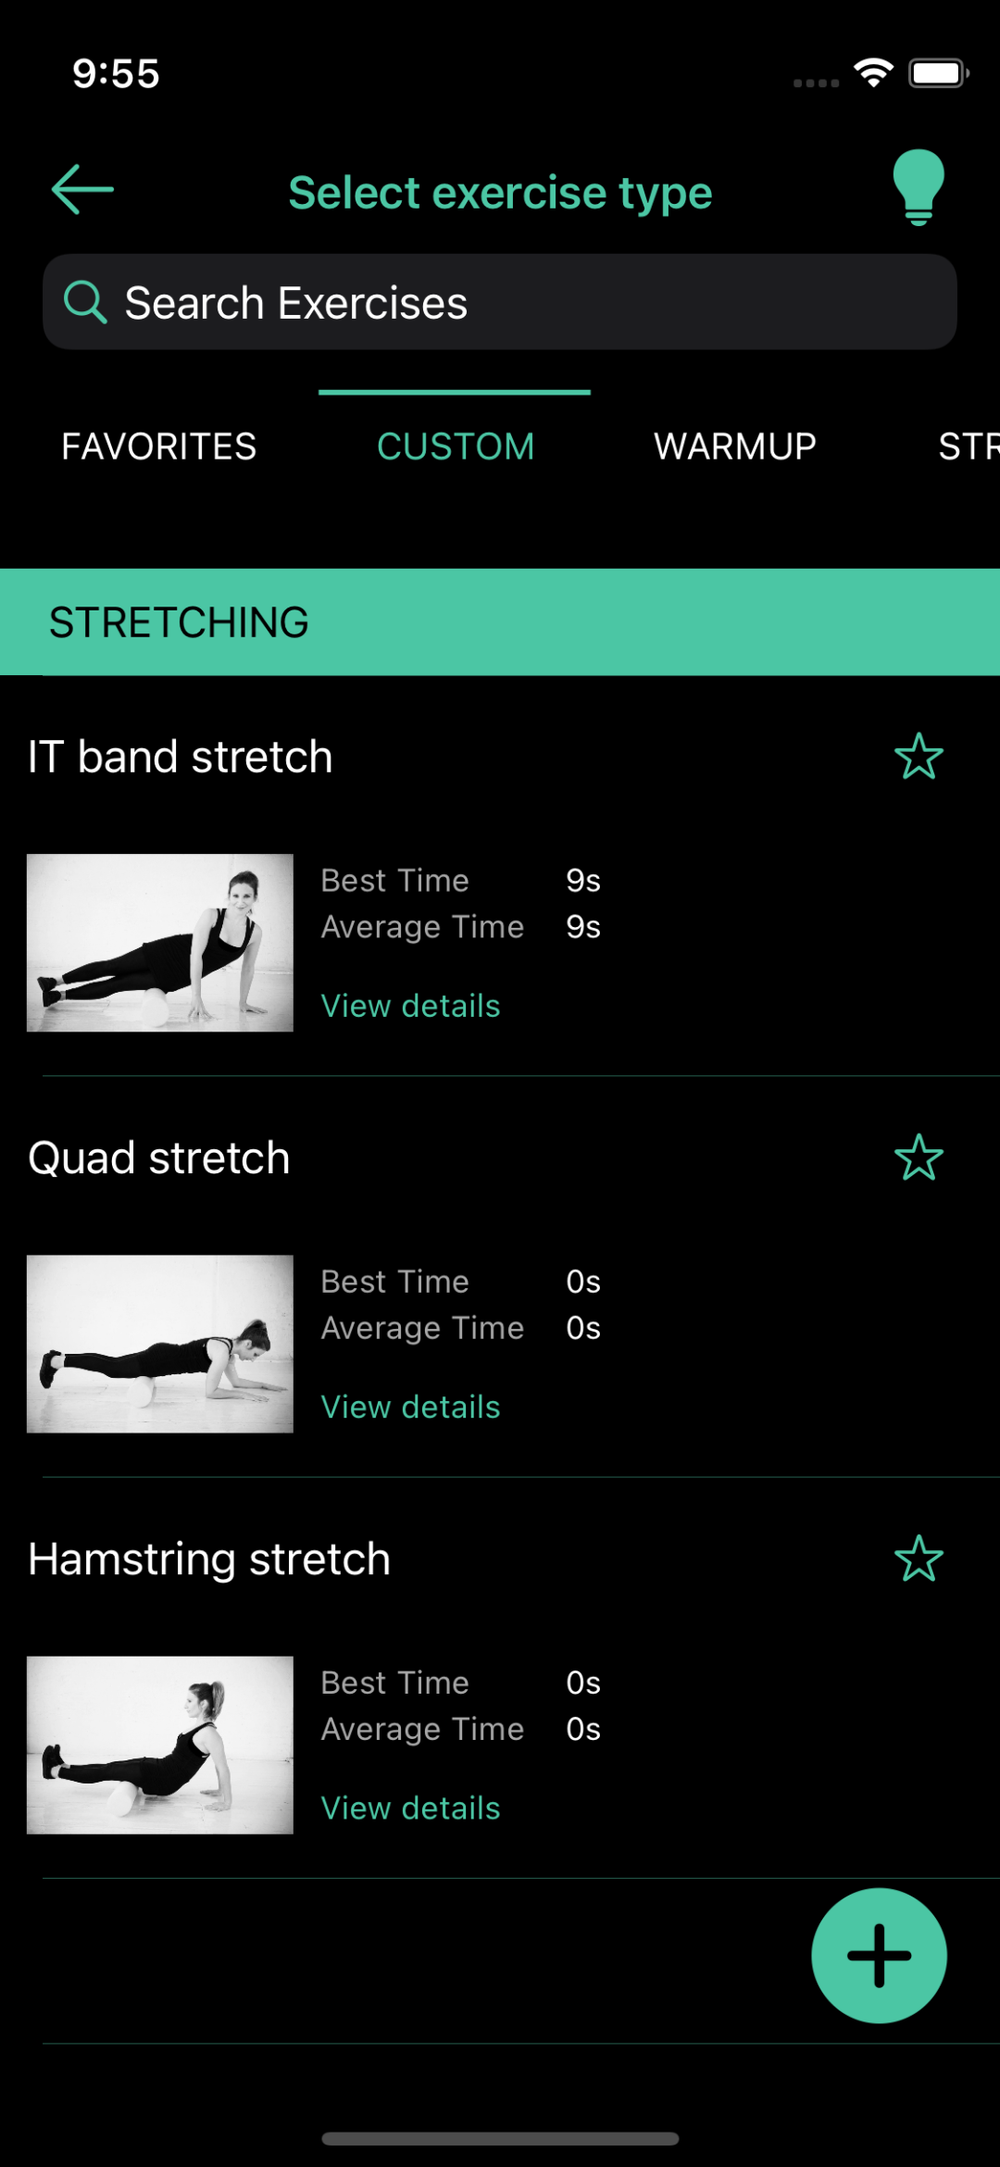 Select any exercise including custom ones